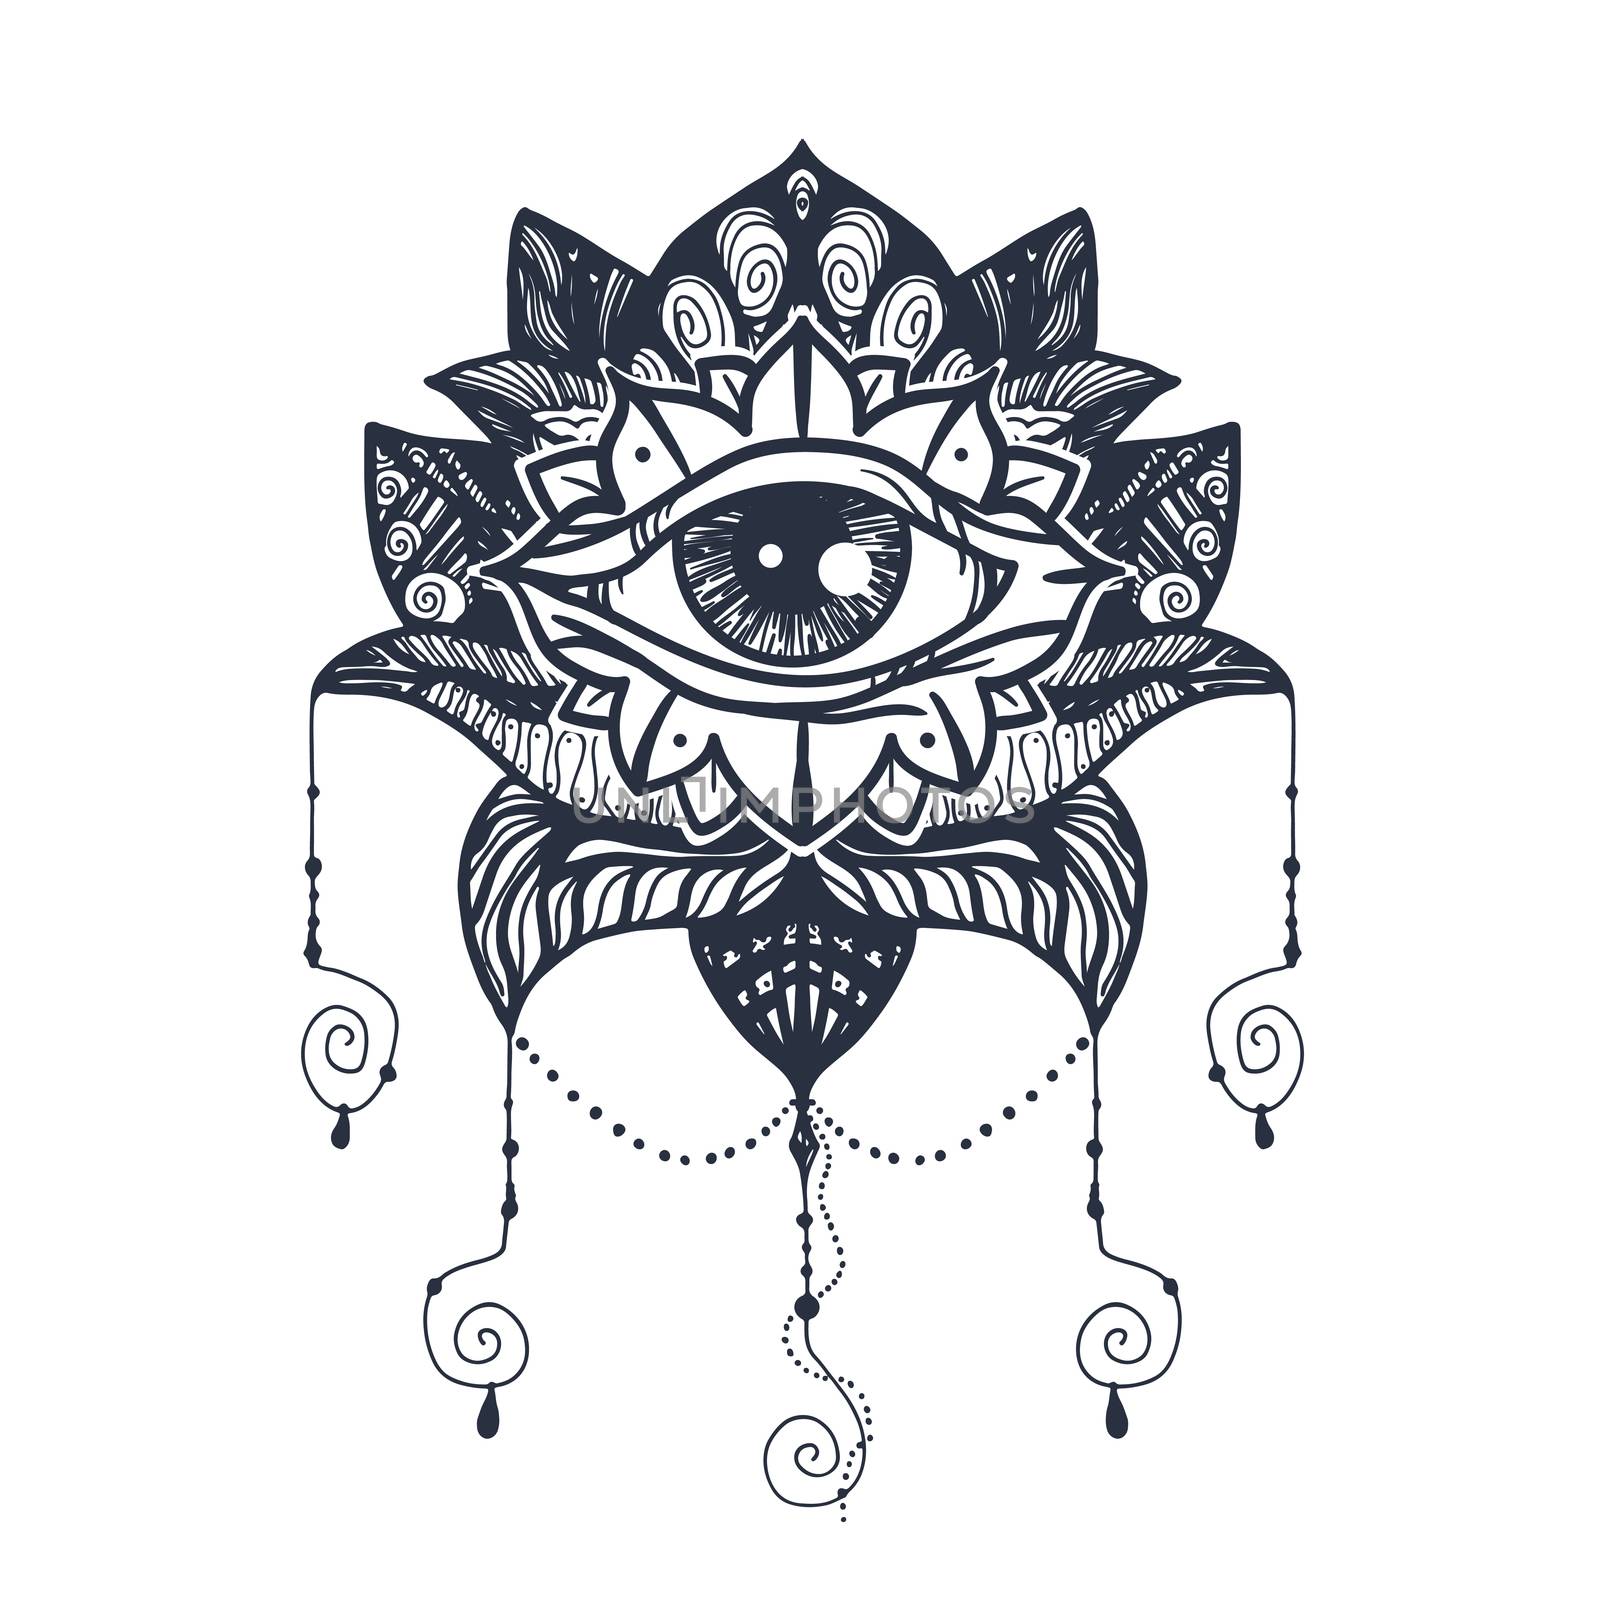 Vintage All Seeing Eye in Mandala Lotus. Providence magic symbol for print, tattoo, coloring book,fabric, t-shirt, cloth in boho style. Astrology, occult, esoteric insight sign with eye. Vector